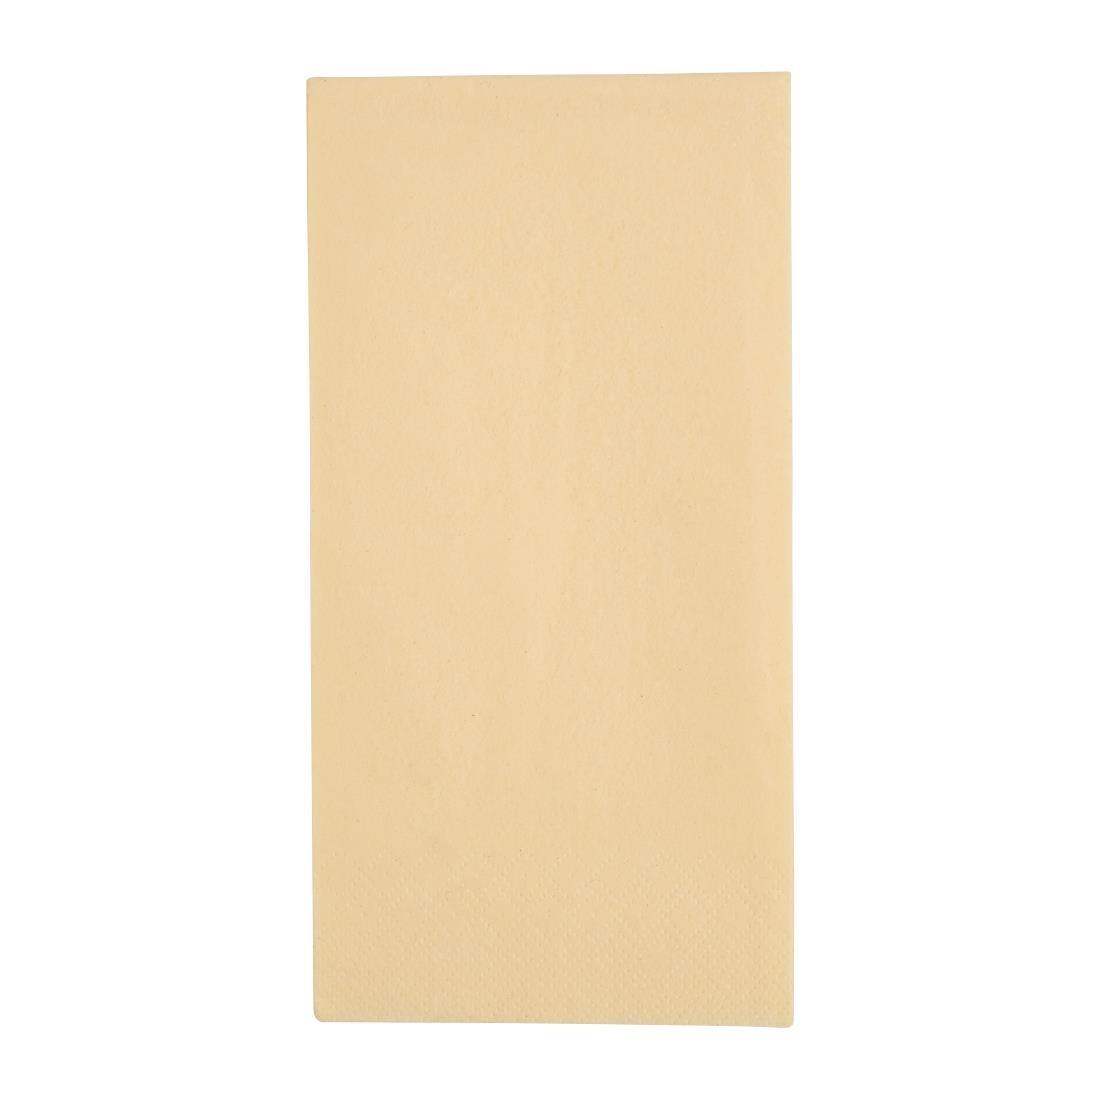 Fiesta Recyclable Dinner Napkin Cream 40x40cm 3ply 1/8 Fold (Pack of 1000) - FE259  - 1